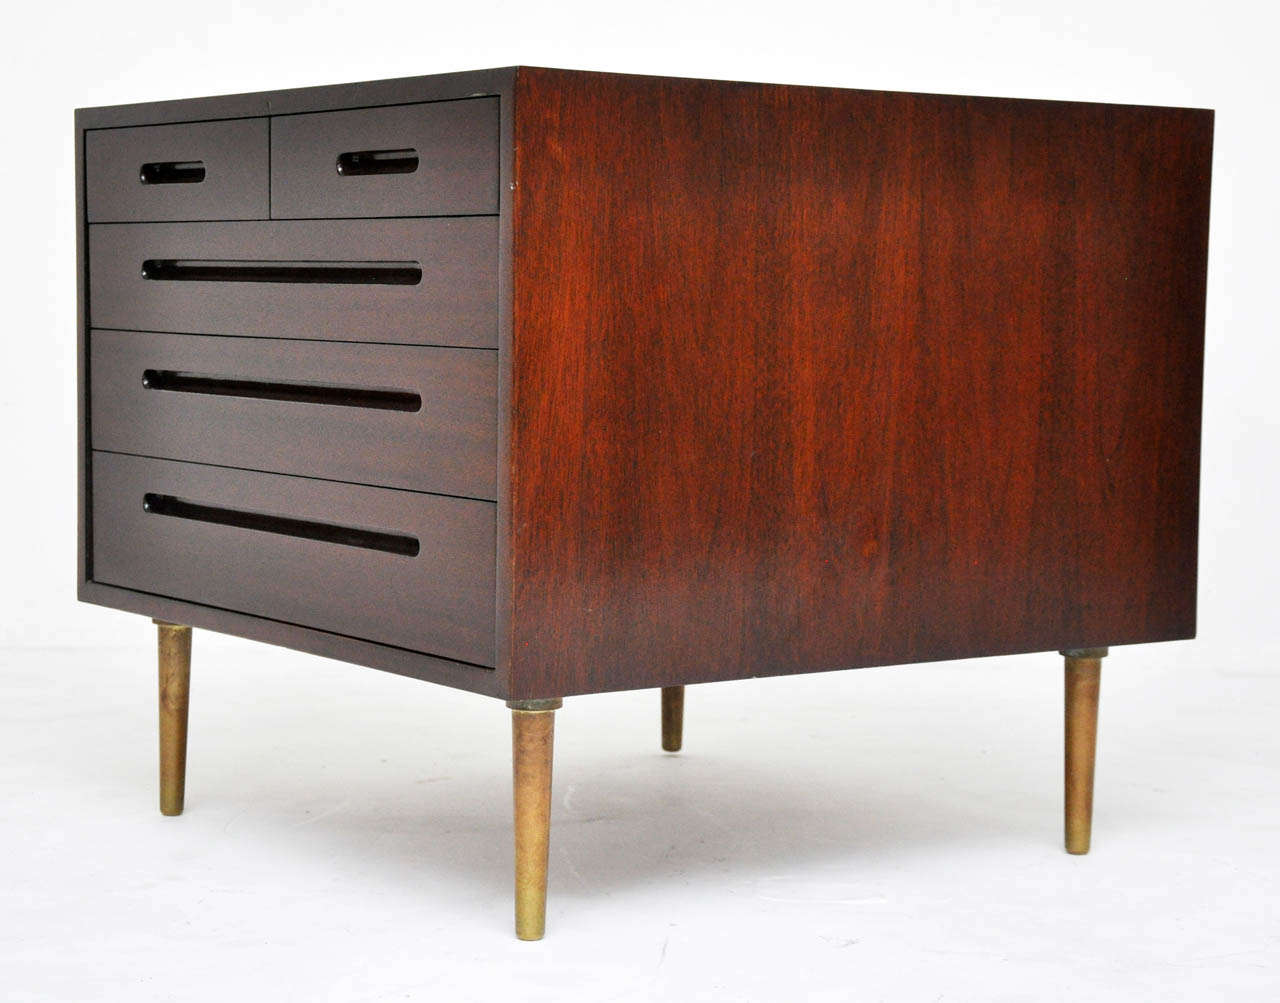 Chest of drawers/lamp table by Edward Wormley for Dunbar.  Espresso finish mahogany case with extra deep drawers over brass legs.